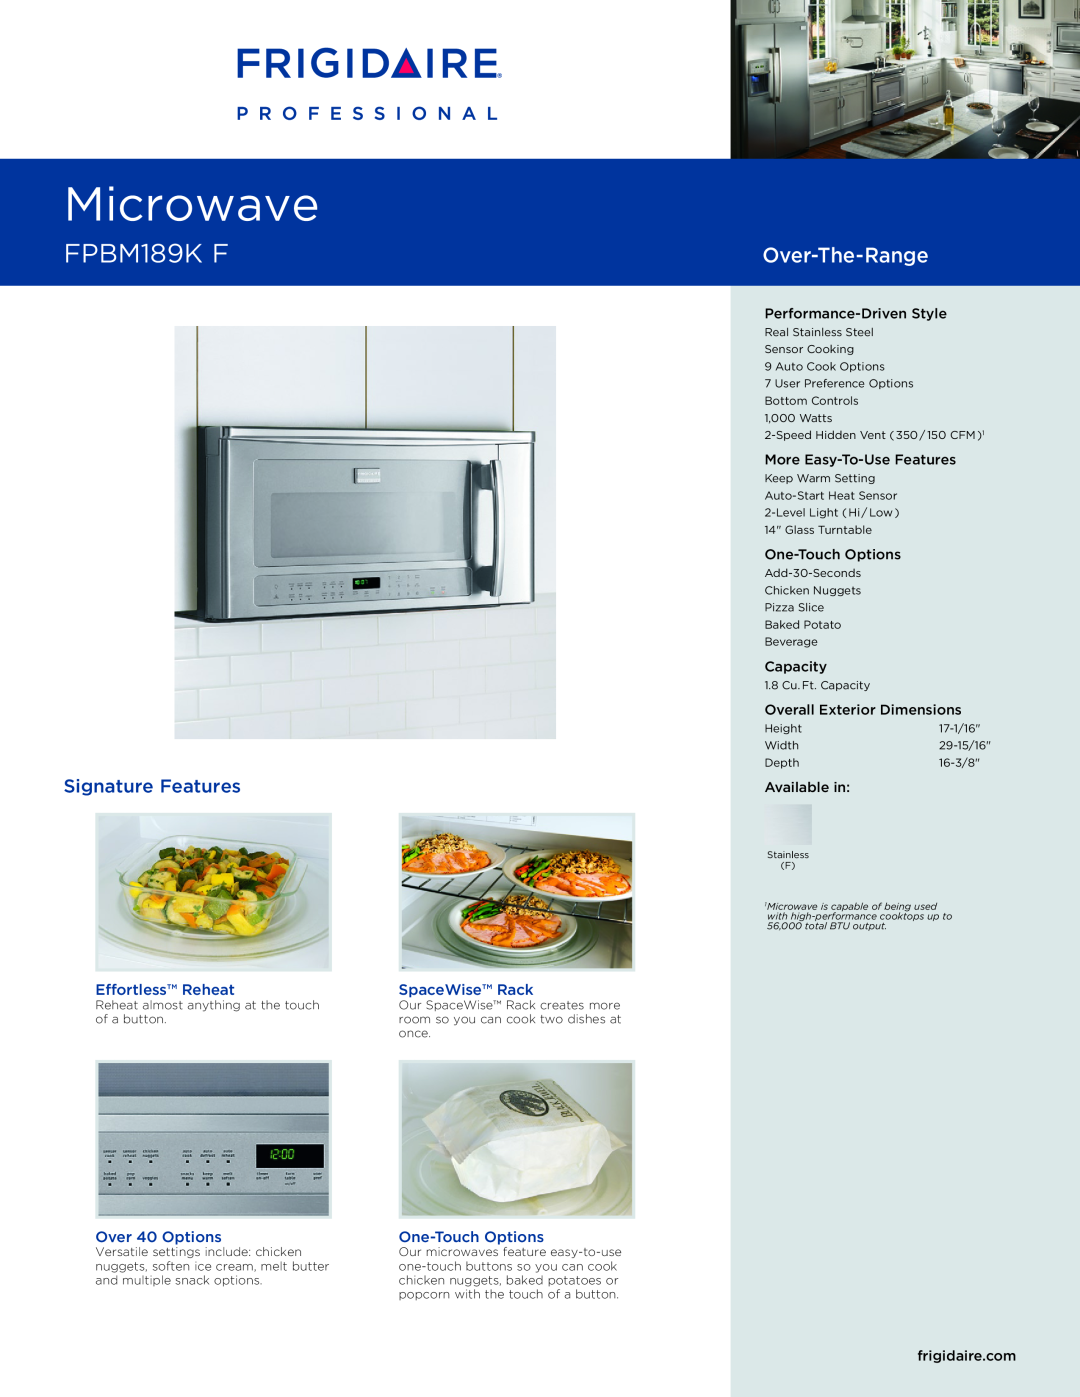 Frigidaire FGBM205KF, FPBM189KF manual Use &Care, of your Microwave Oven, All about the, Ta B L E O F C O N T E N T S 